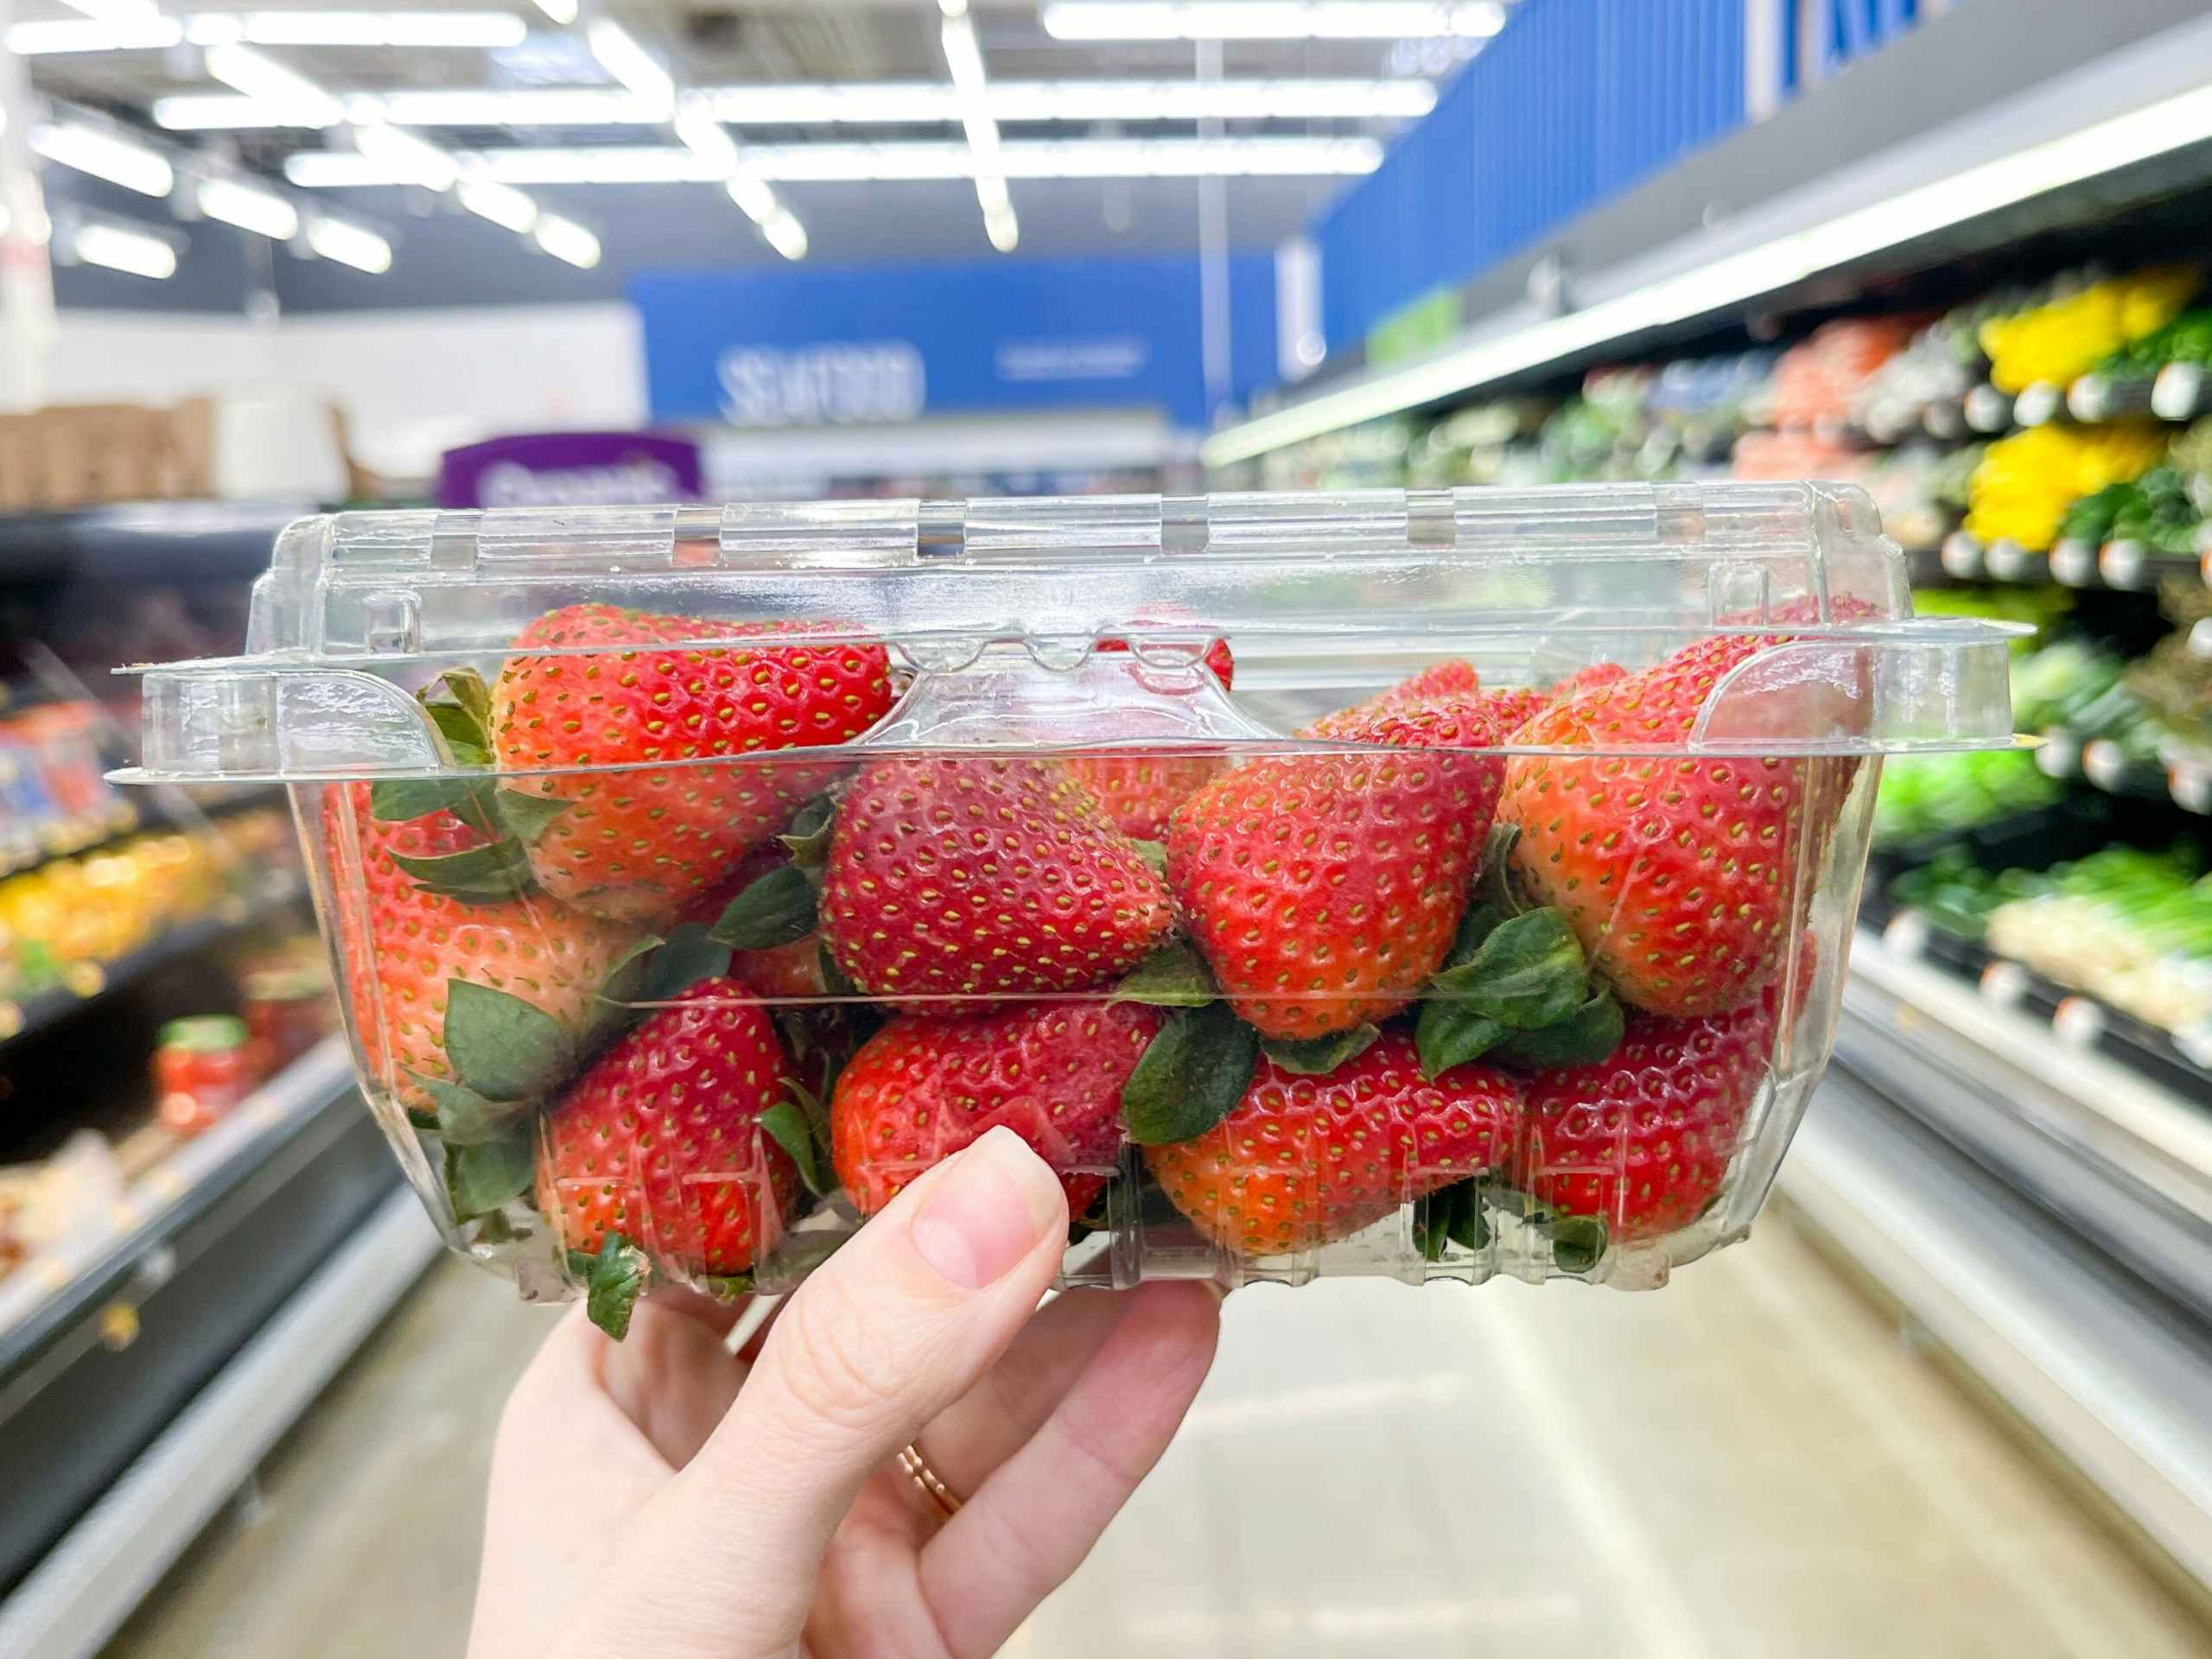 A box of strawberries held out by hand in front of a store aisle.